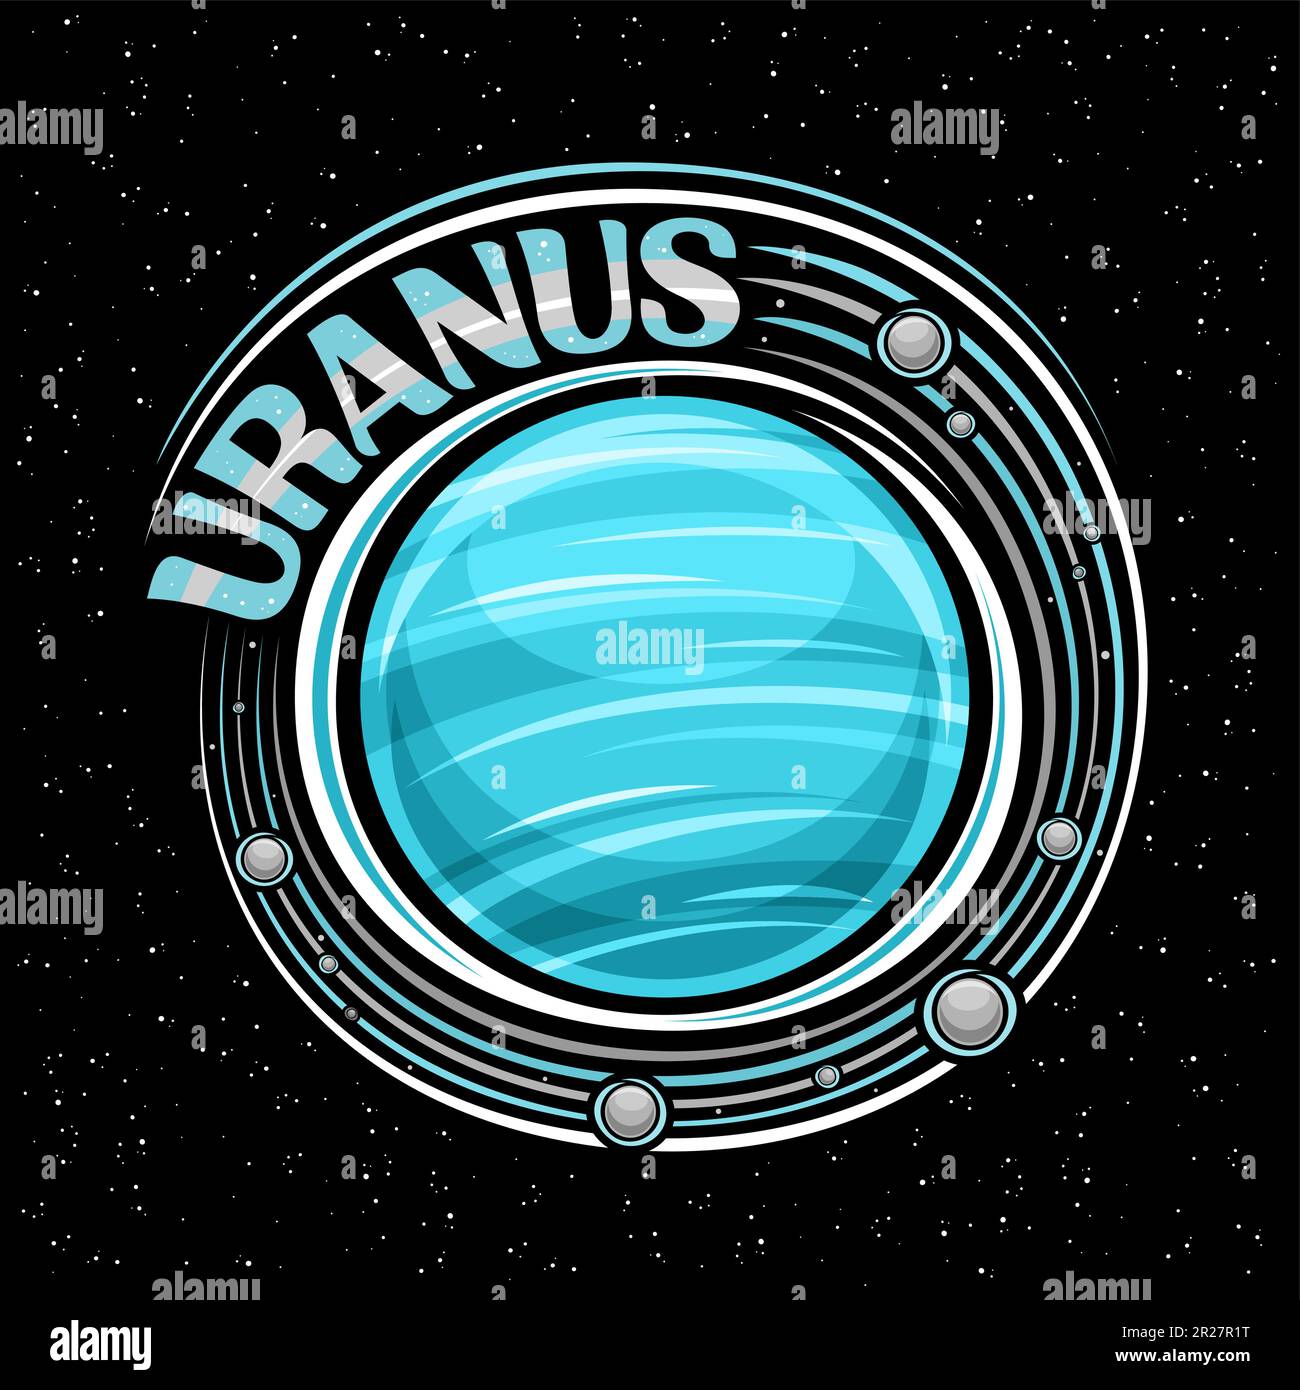 Vector logo for Uranus, decorative fantasy print with rotating planet uranus and many moons, gas windy surface, cosmo badge with unique brush letterin Stock Vector